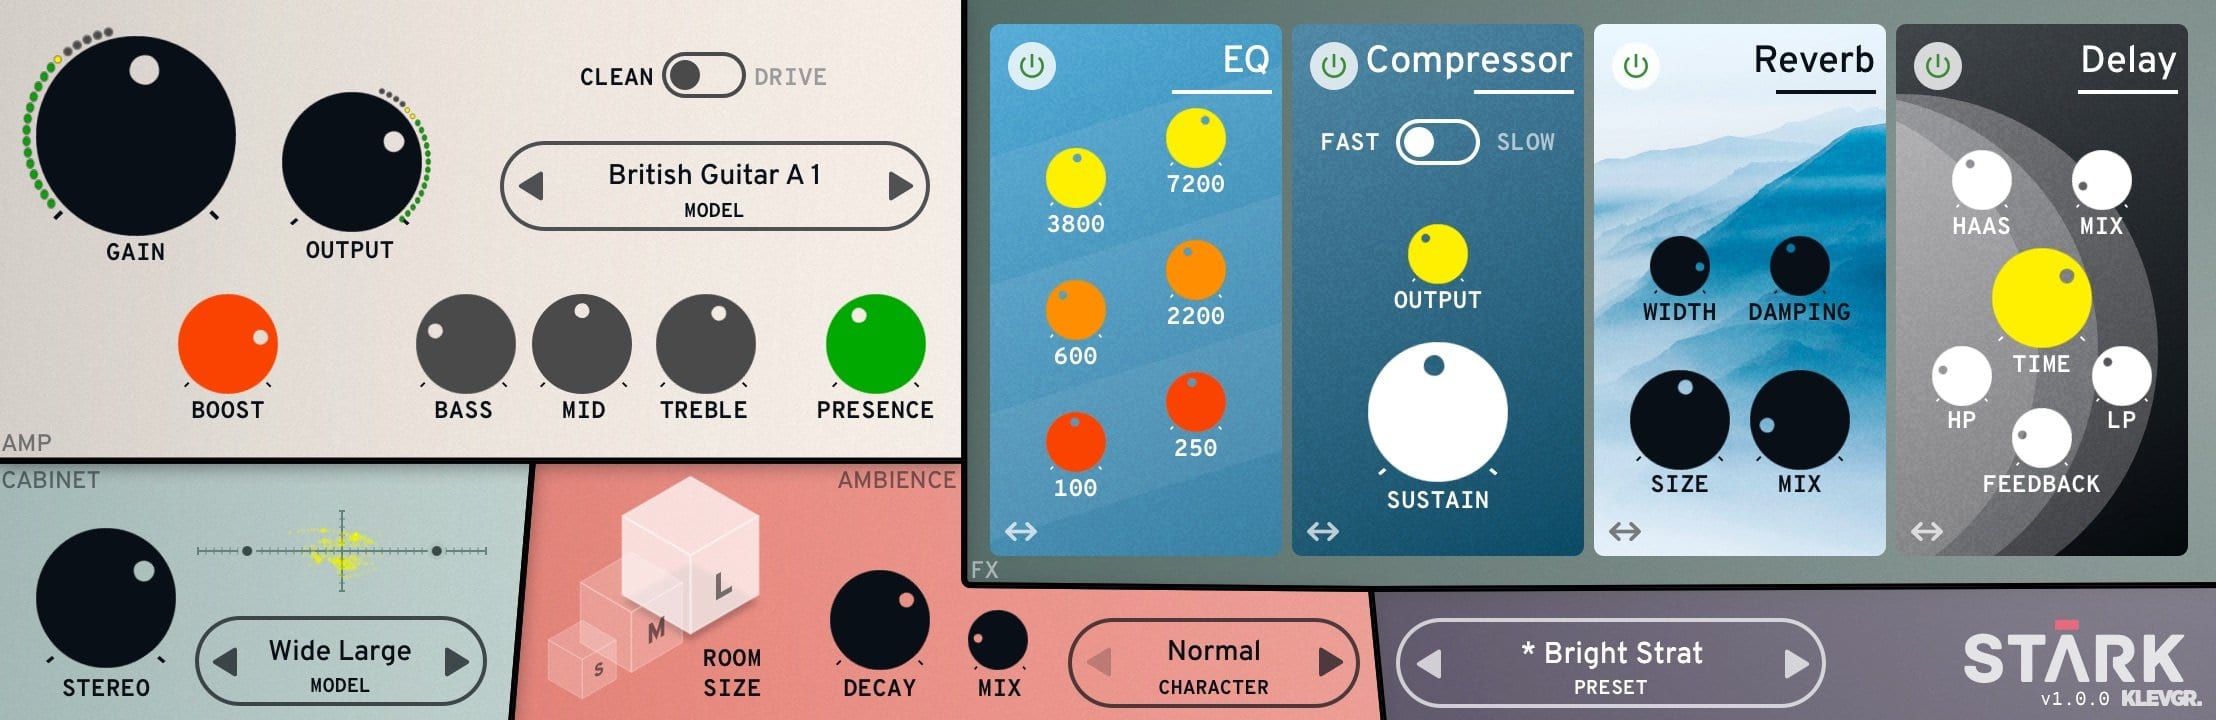 Klevgrand Stark has a minimalistic GUI and lets you concentrate on building guitar tones